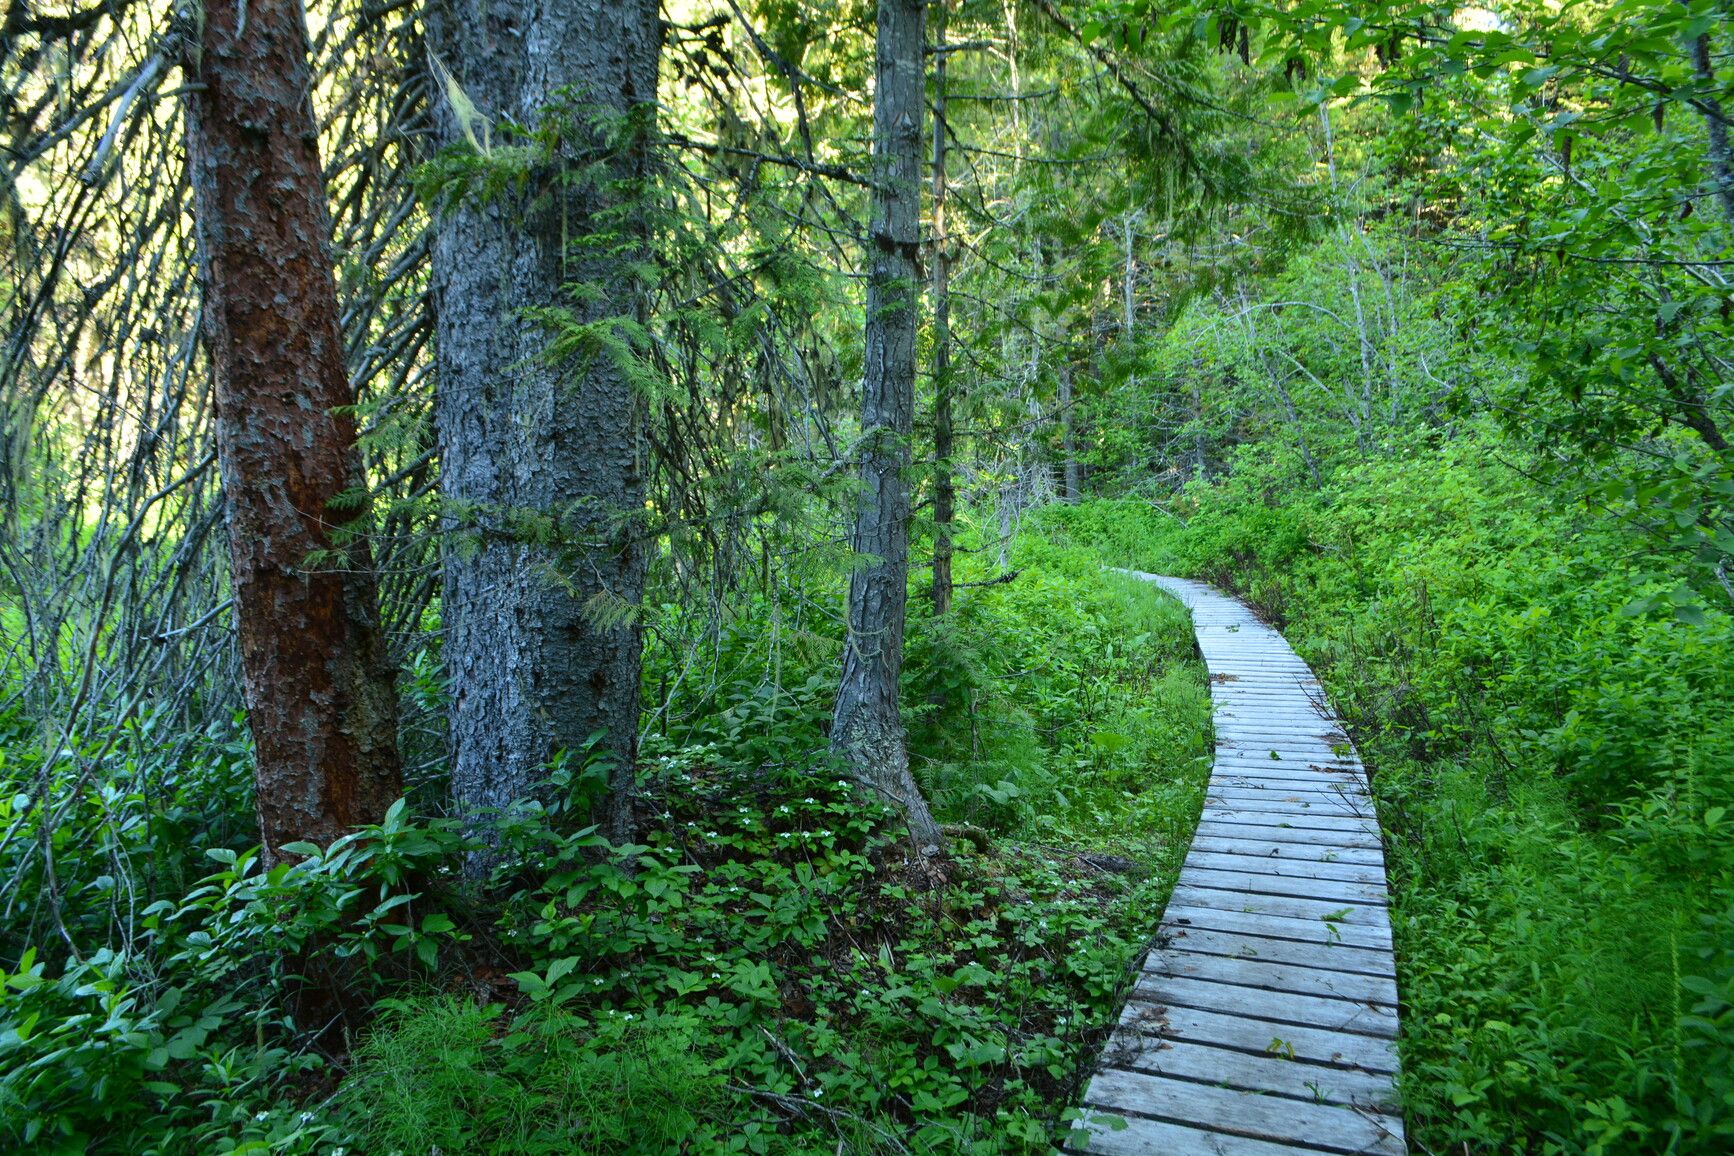 Embark on an adventure through the dense forest of Champion Lakes Park, strolling along a boardwalk trail.